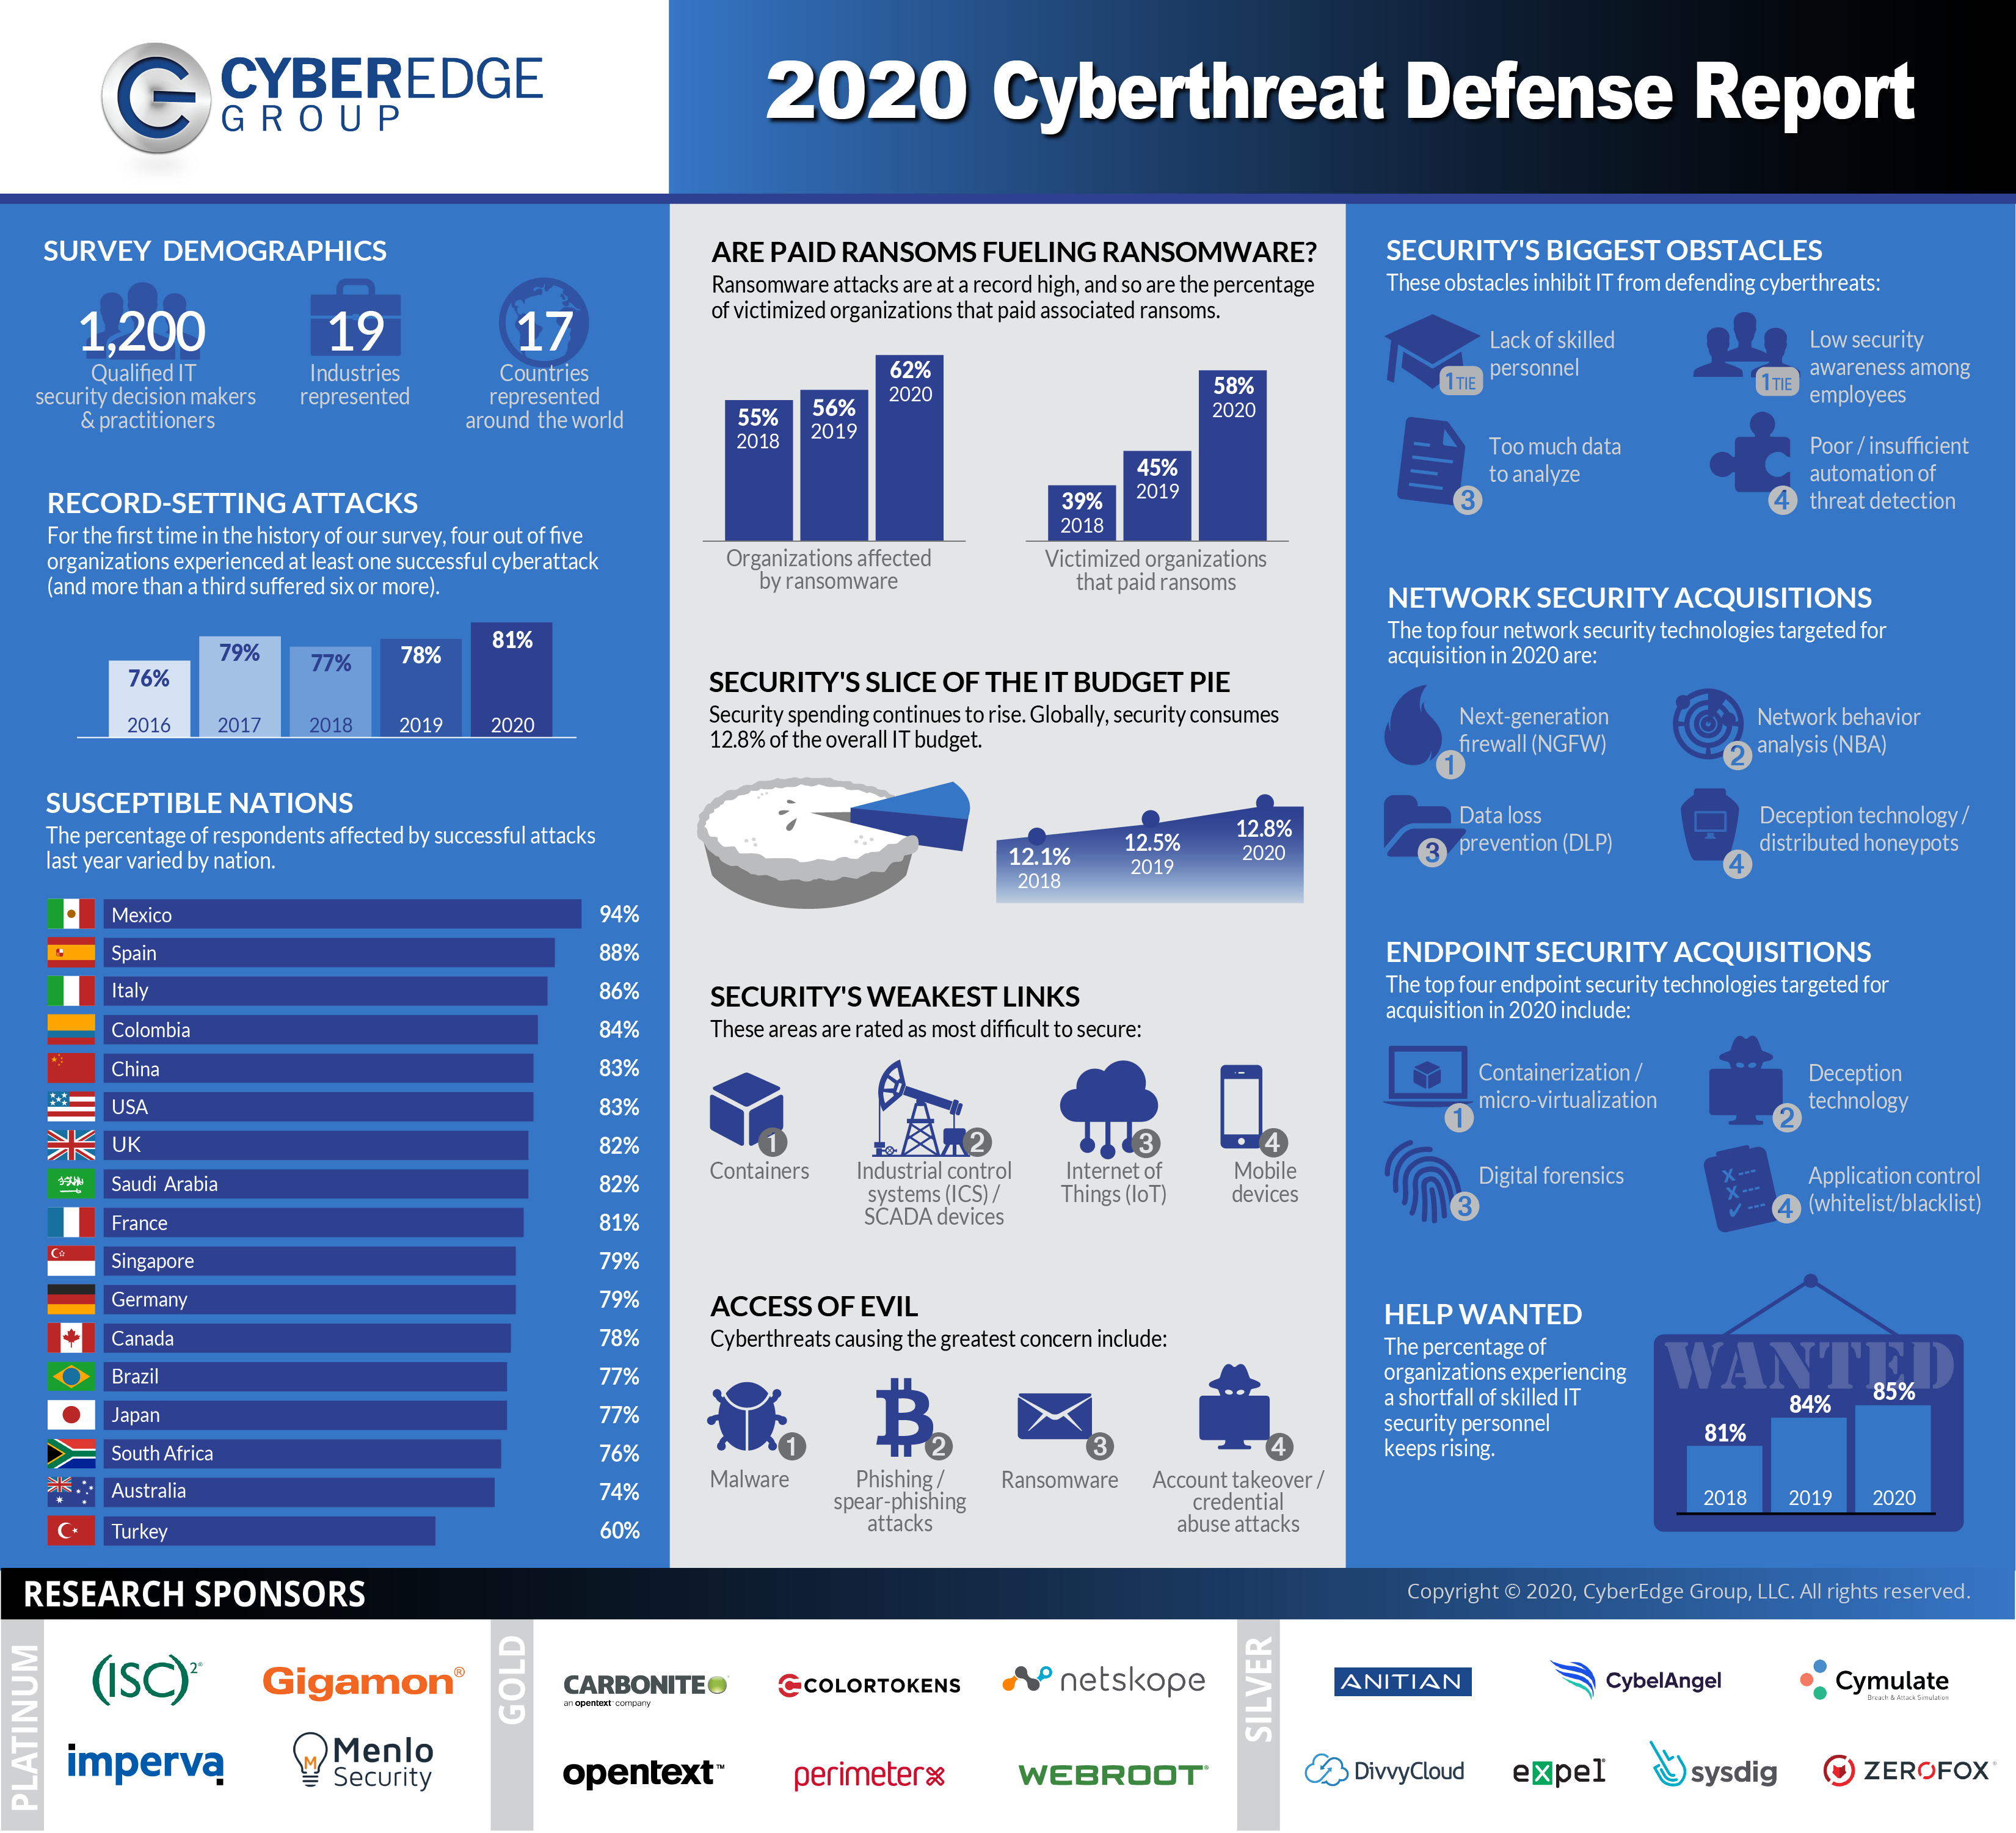 Presentation image for CyberEdge 2020 Cyberthreat Defense Report Infographic